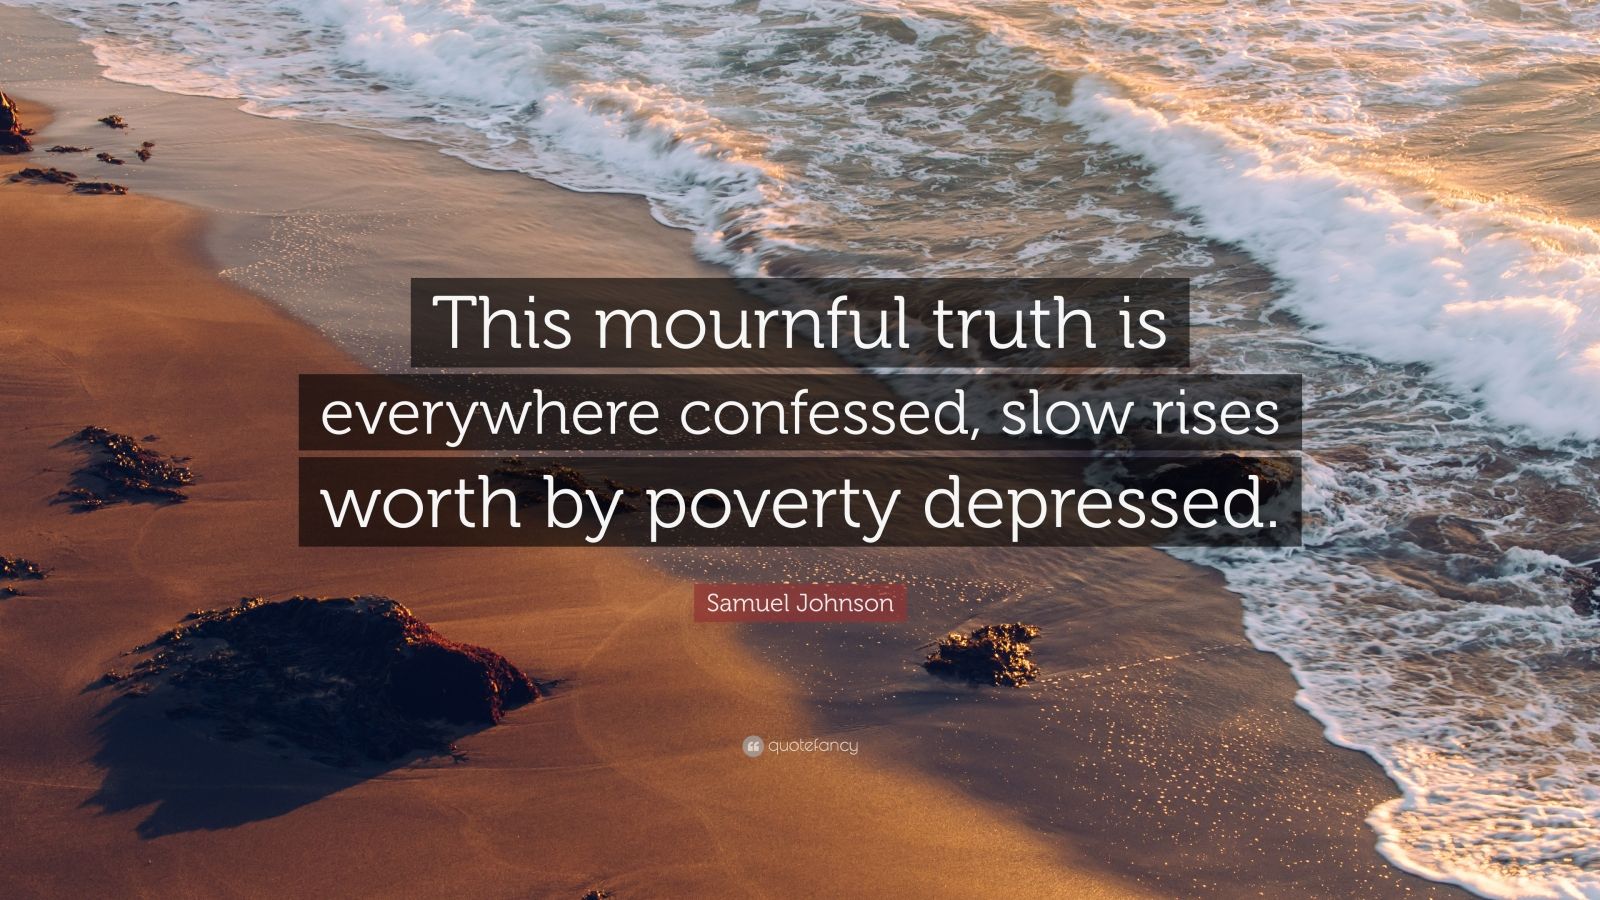 Samuel Johnson Quote: “This mournful truth is everywhere confessed